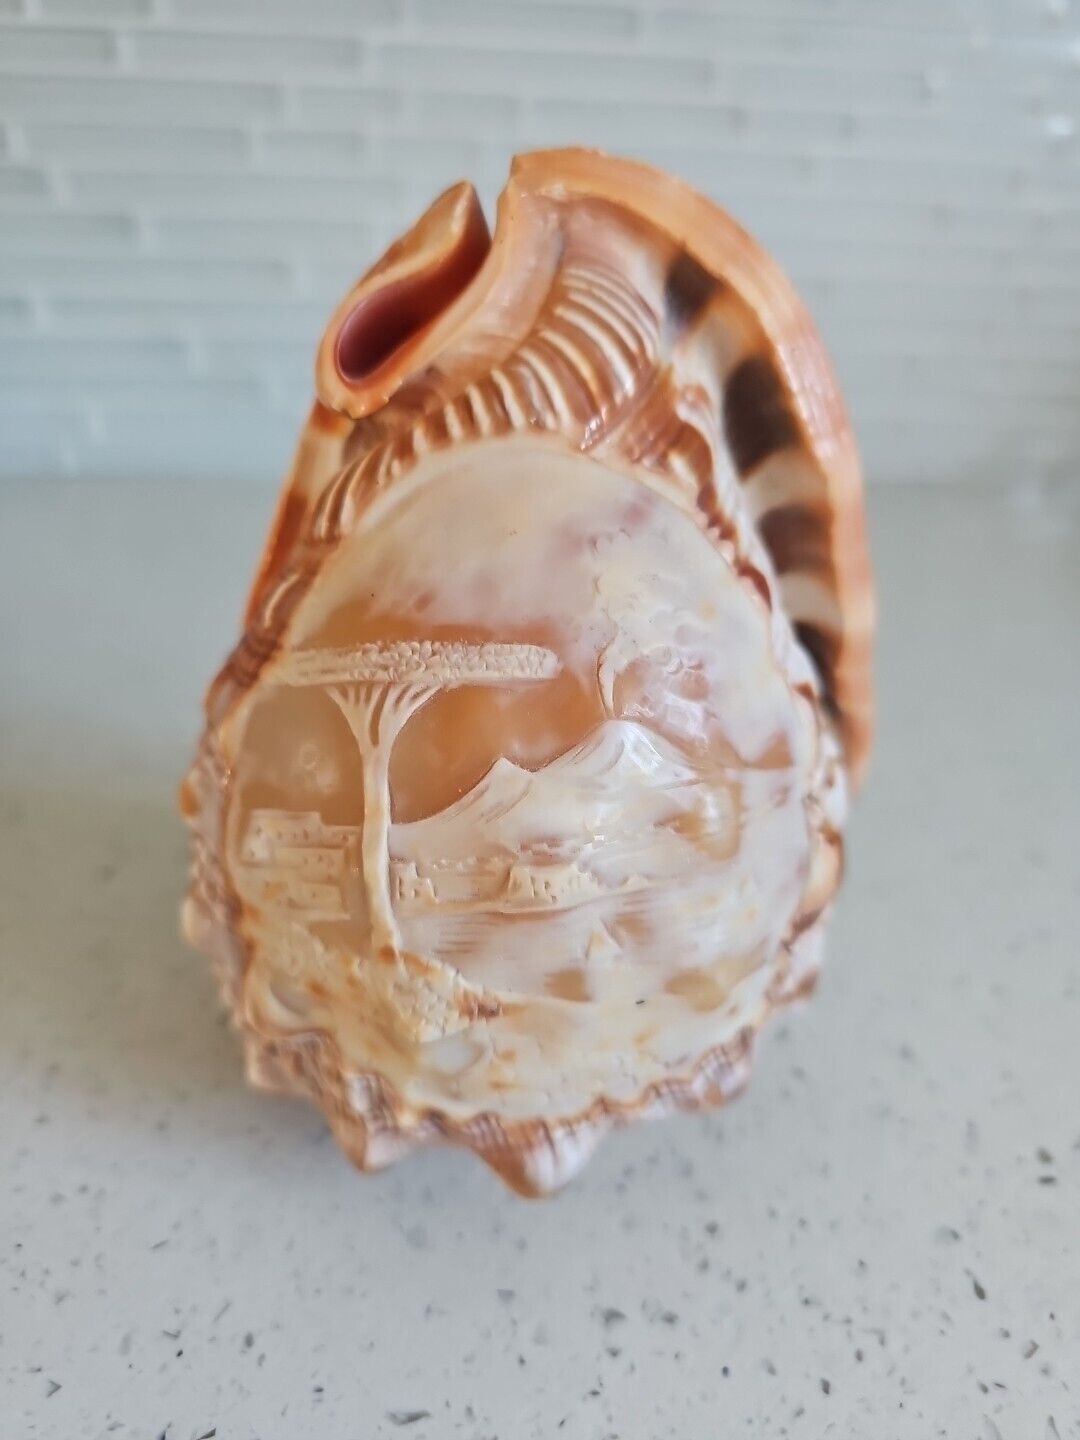 Rare Italy Cameo Carved Conch Shell Lamp Shade  Subject Vesuvius Erupted 79 AD